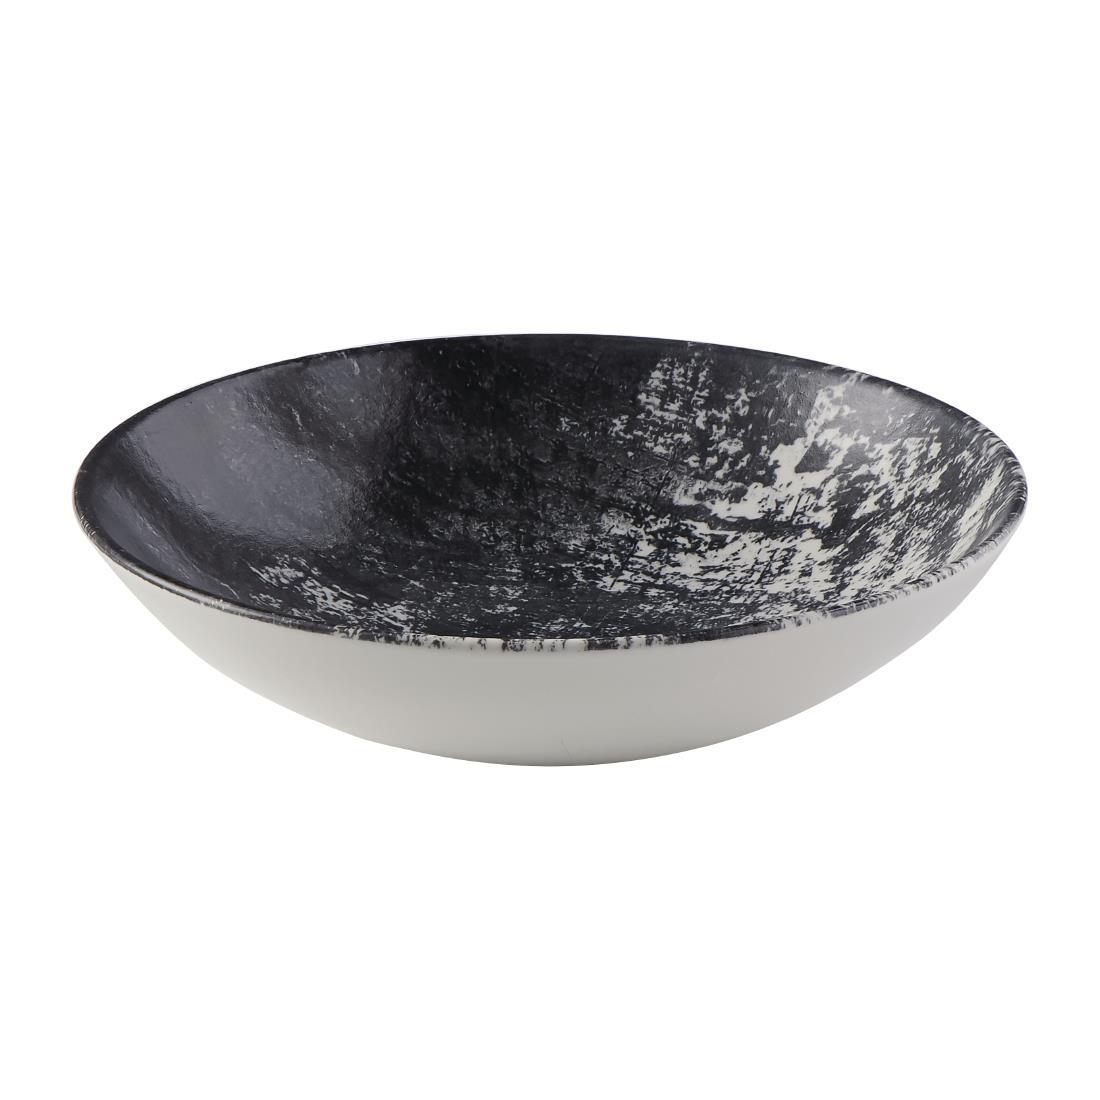 Dudson Makers Urban Evolve Coupe Bowl Black 184mm (Pack of 12) - FS819  - 1